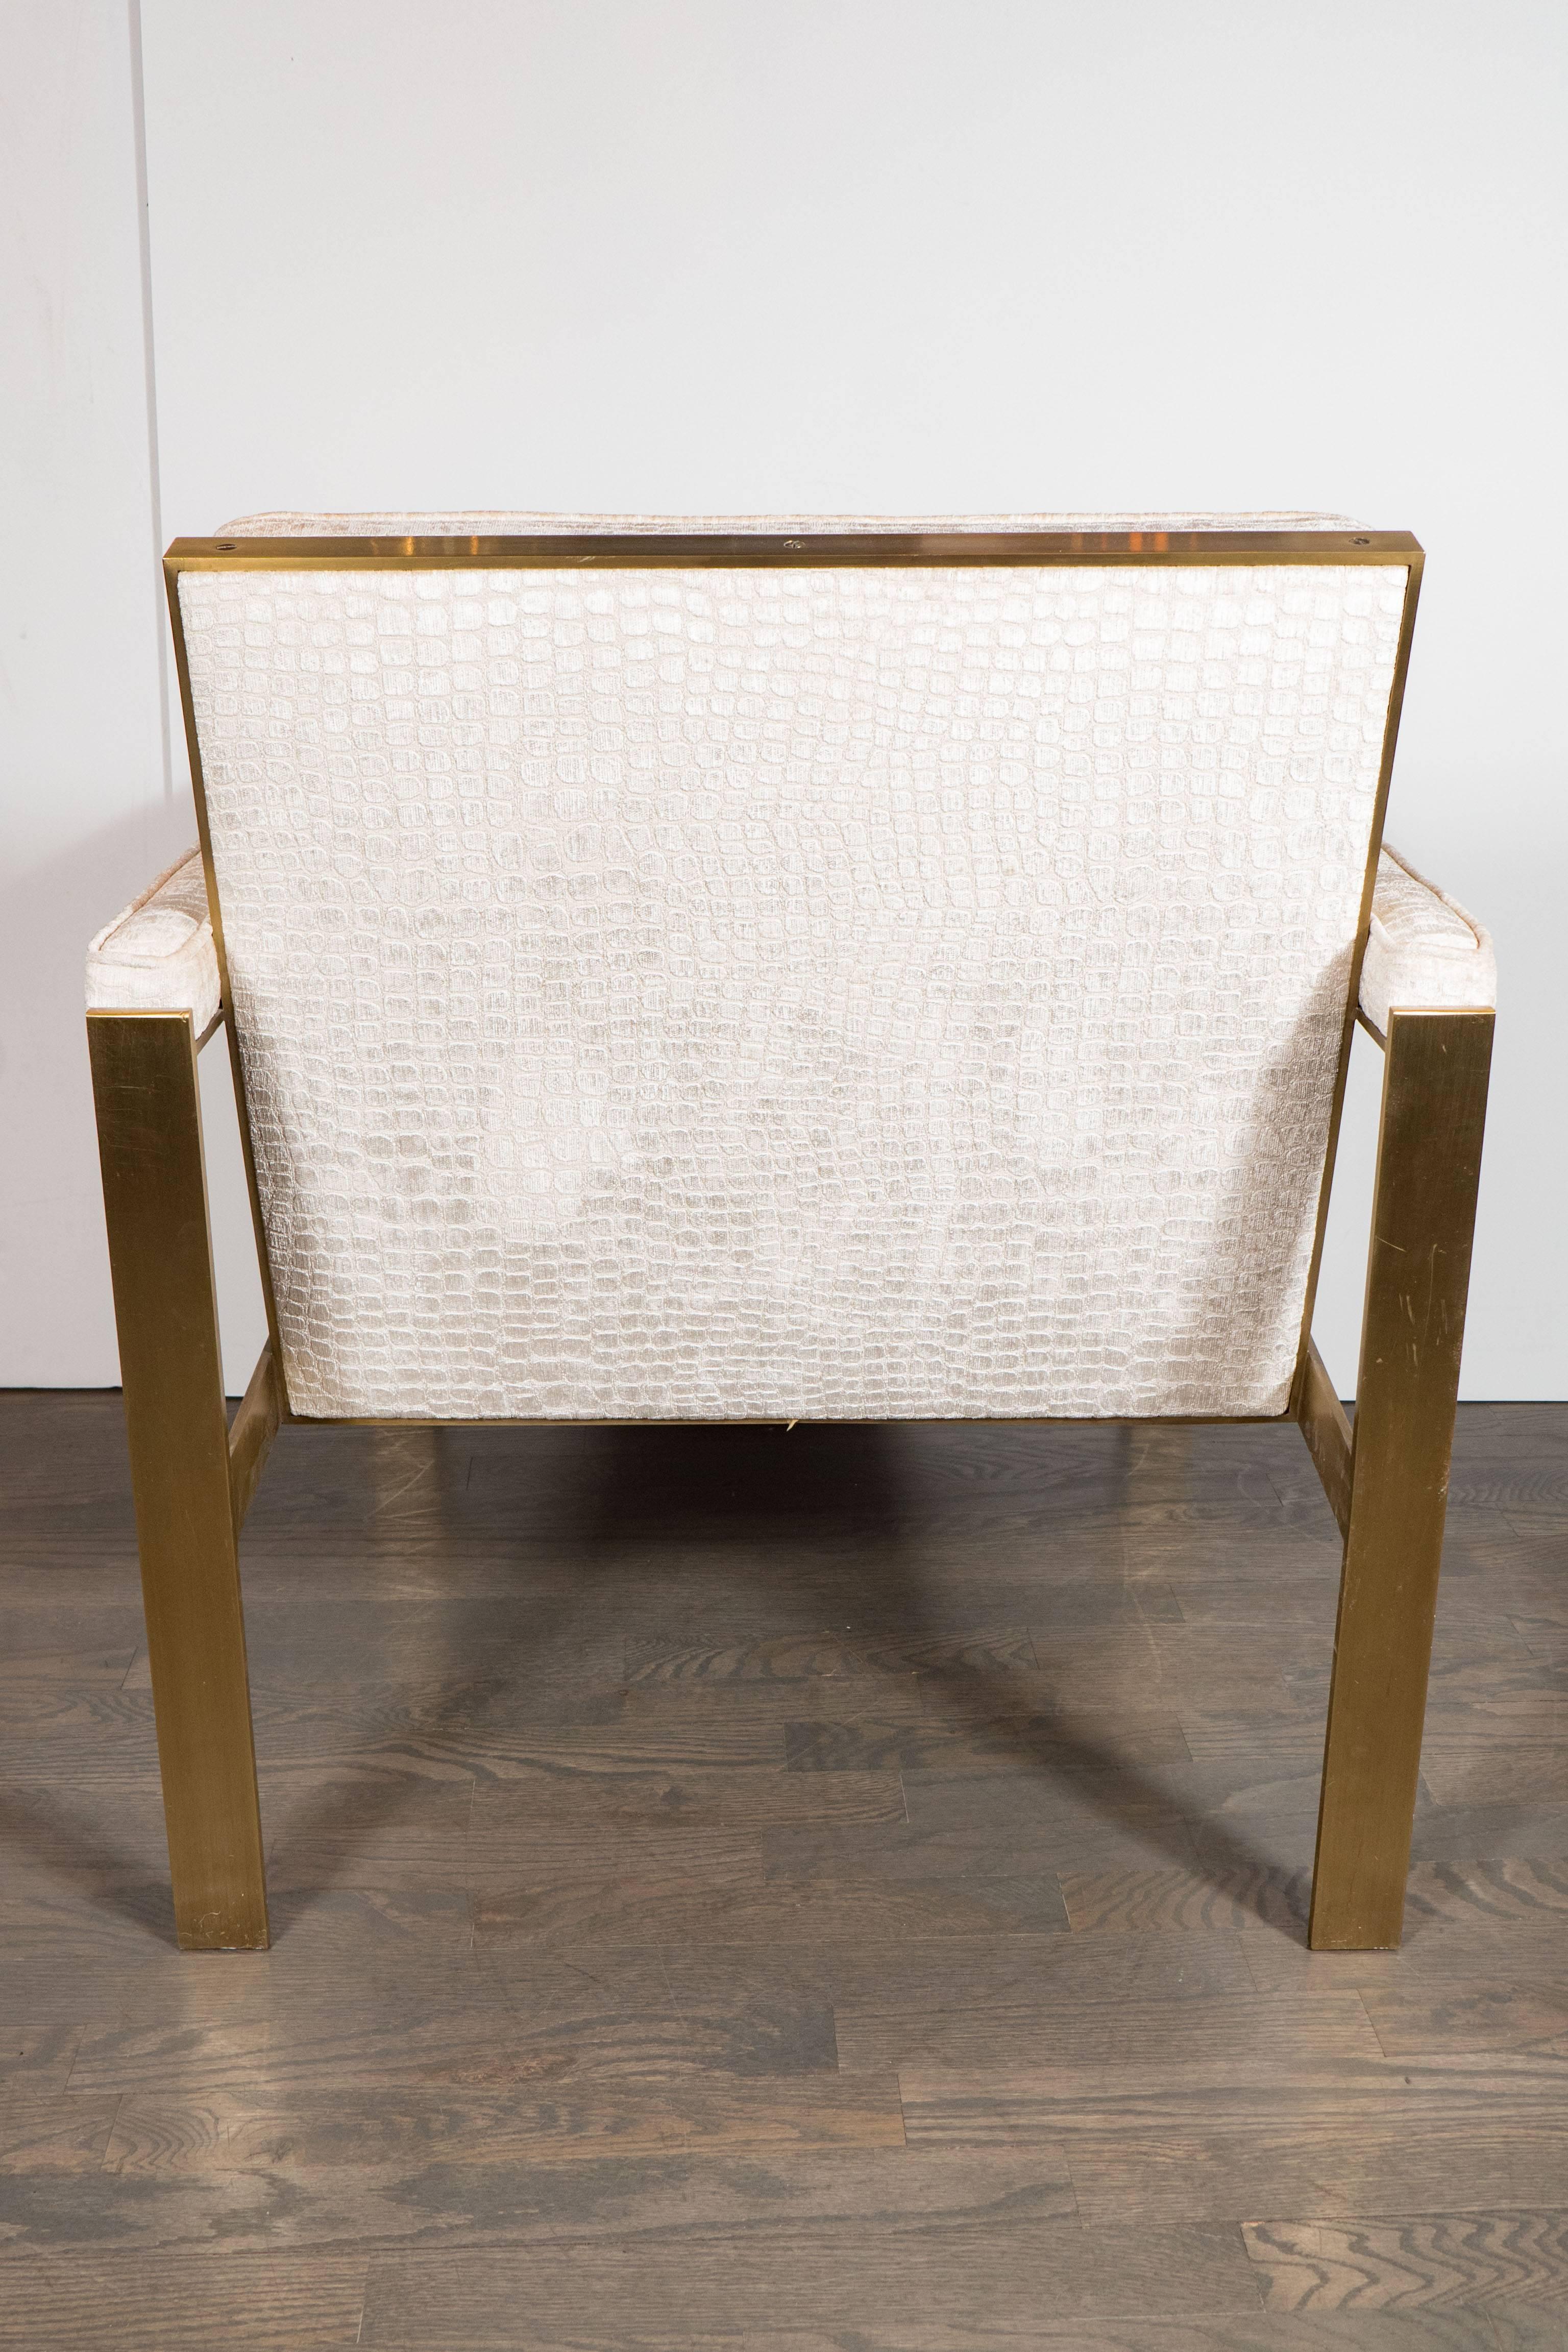 A pair of Mid-Century Modernist brass armchairs by Milo Baughman. The entire frames are a brushed brass. The cushions and full-arm supports have been newly upholstered in a luxe smoked oyster gaufrage crocodile-textured velvet. The design of the